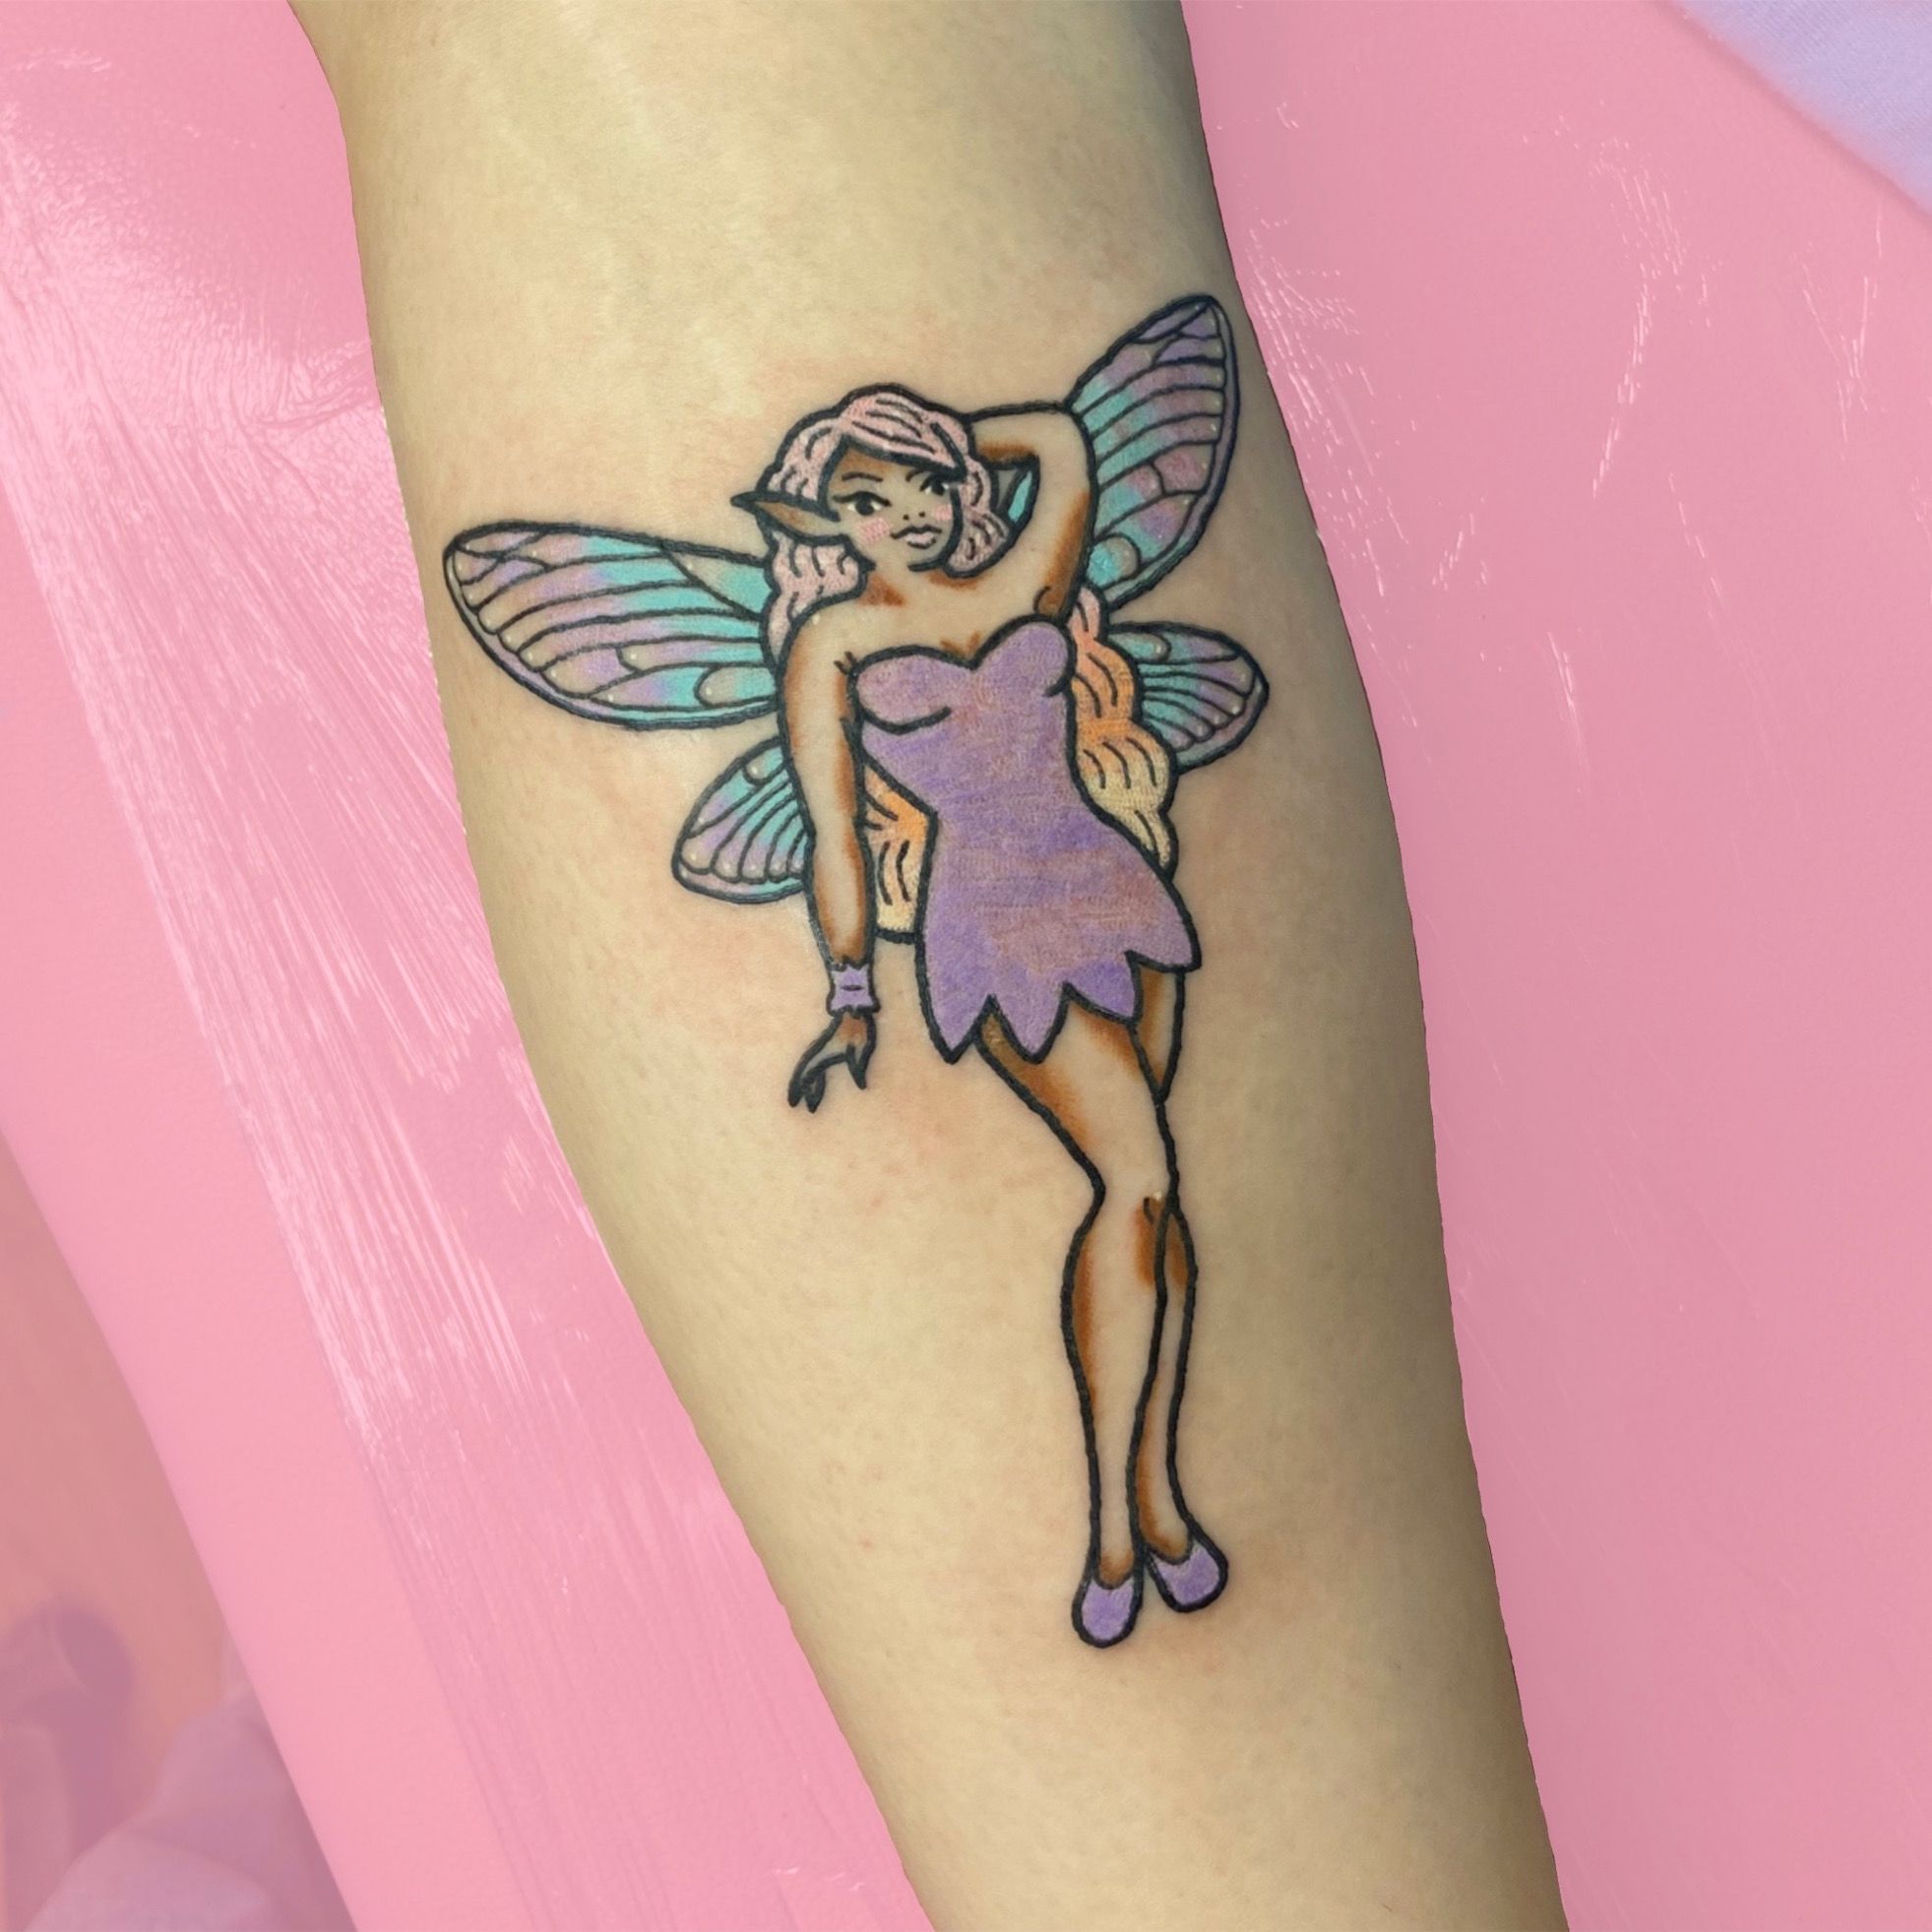 Small Fairy Tattoo Design with Silhouette